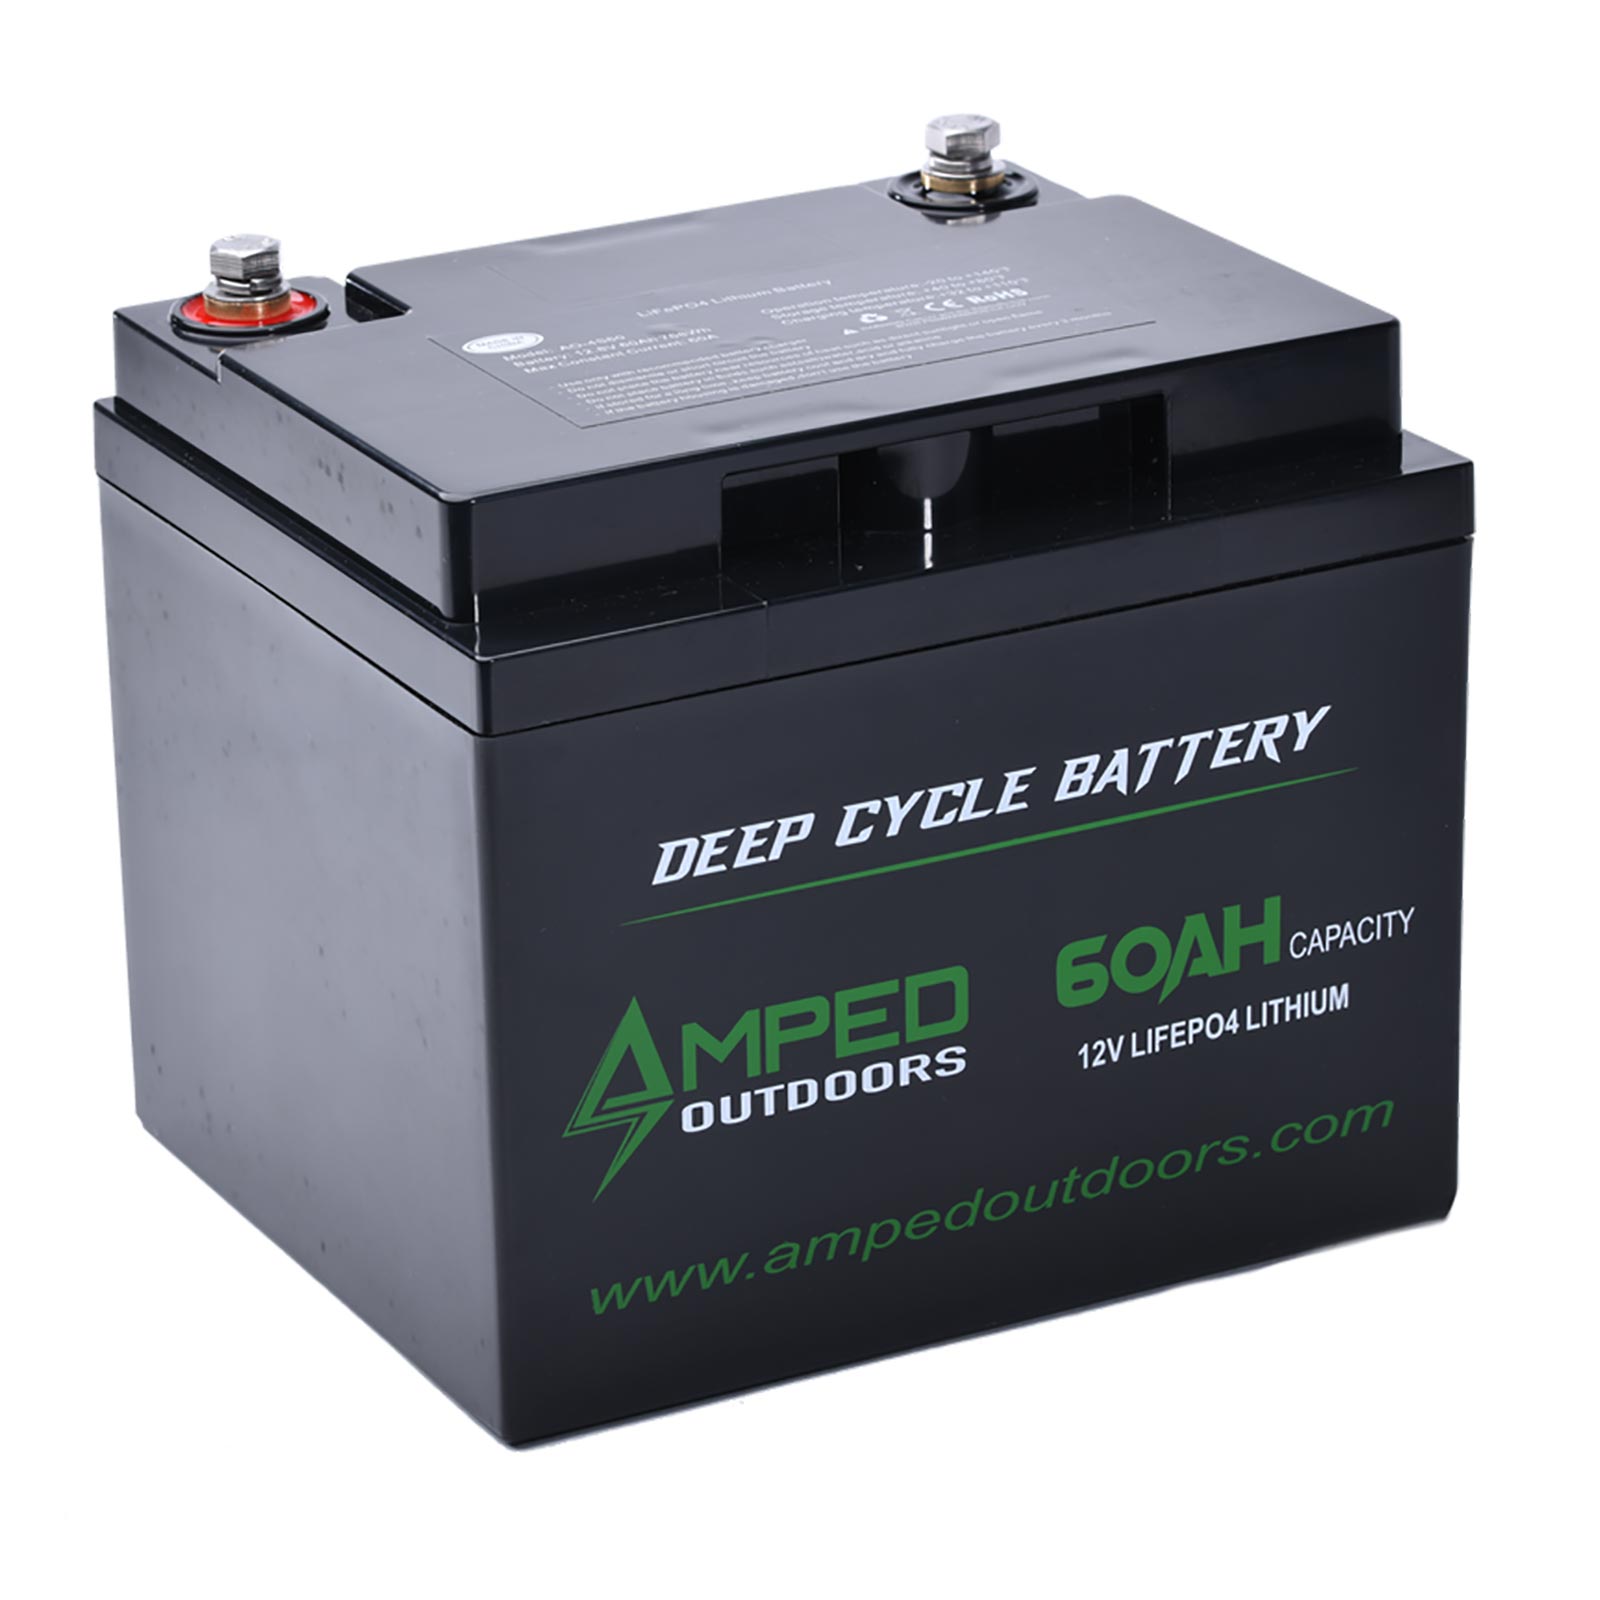 Amped Outdoors 12V 60Ah Lithium Battery